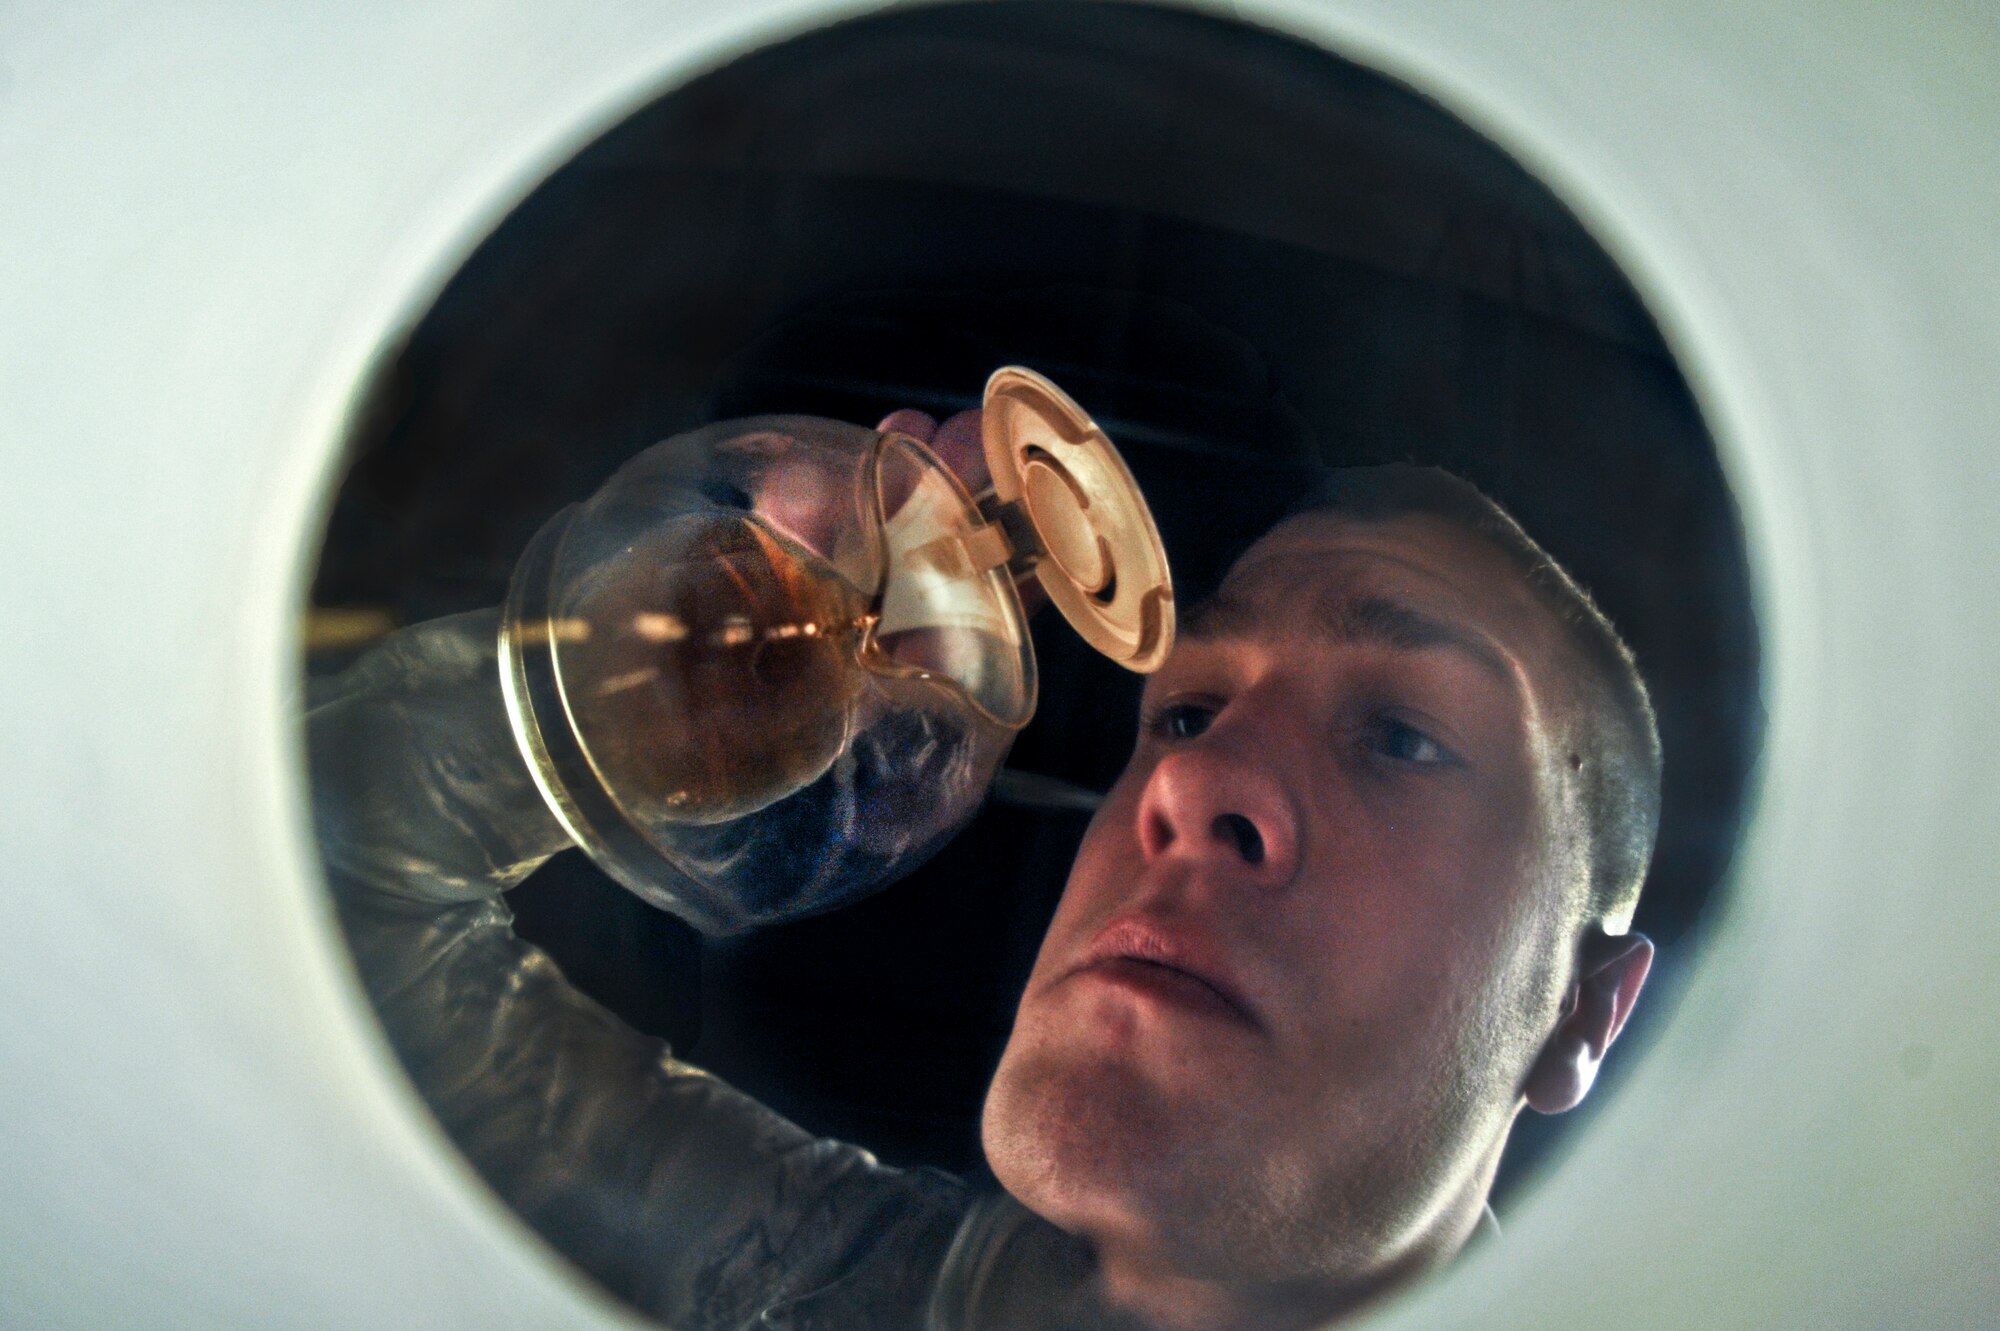 An Airman sadly watches the last few drops of coffee drain from the pot April 1, 2013, at Buckley Air Force Base, Colo. The Air Force is set to ban coffee beginning fiscal 2014. (U.S. Air Force Photo by Airman 1st Class Riley Johnson/Released)  